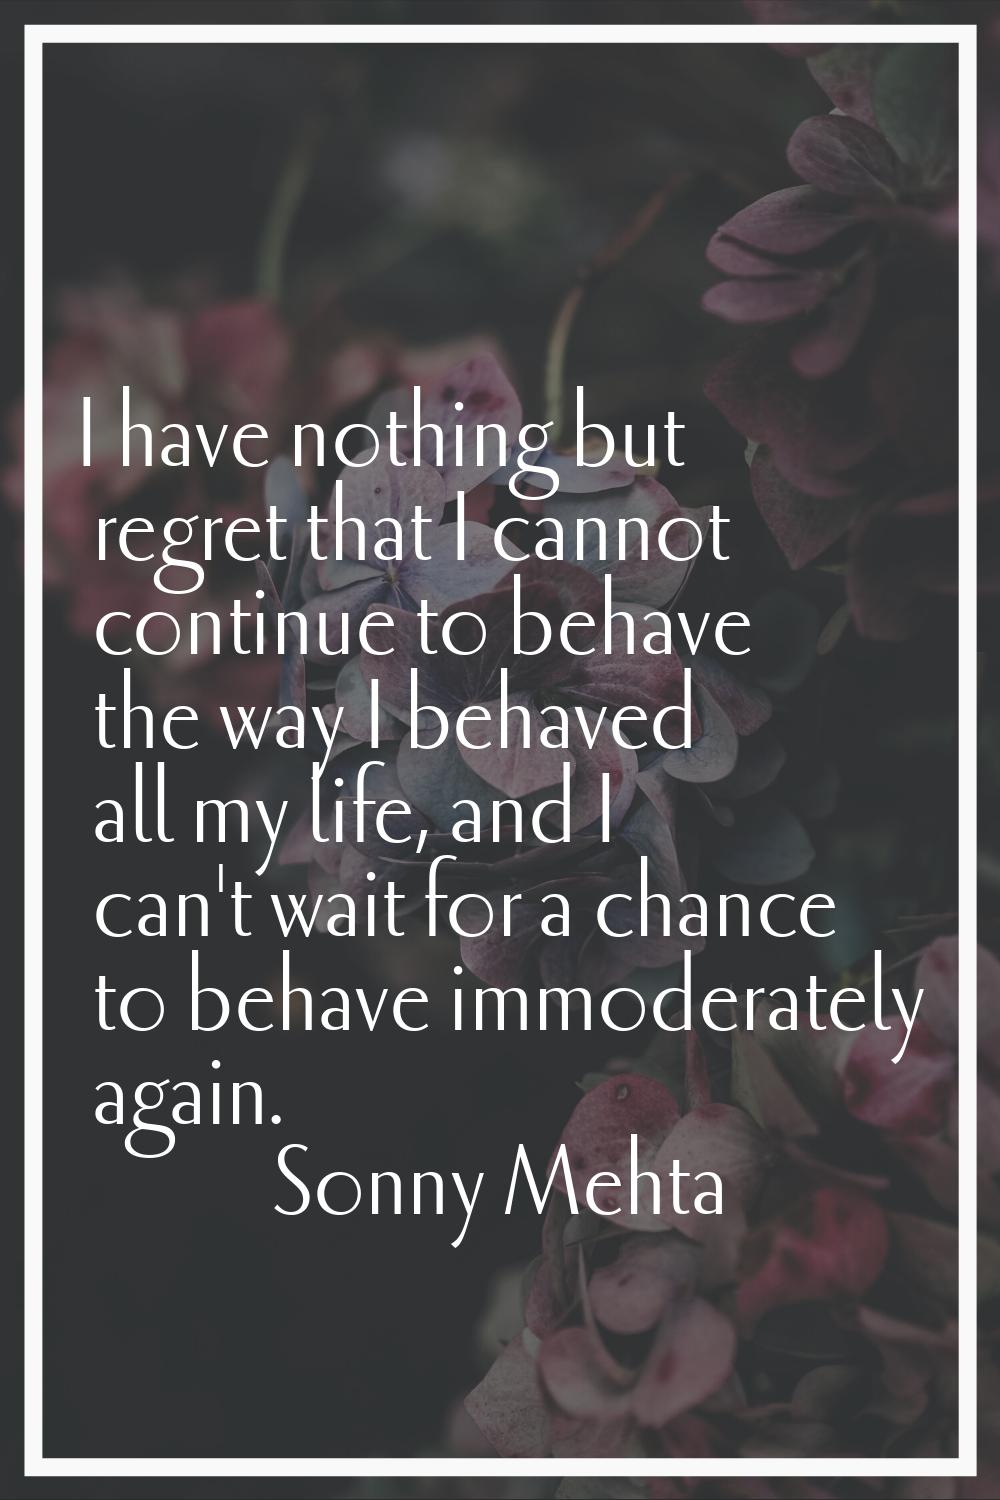 I have nothing but regret that I cannot continue to behave the way I behaved all my life, and I can